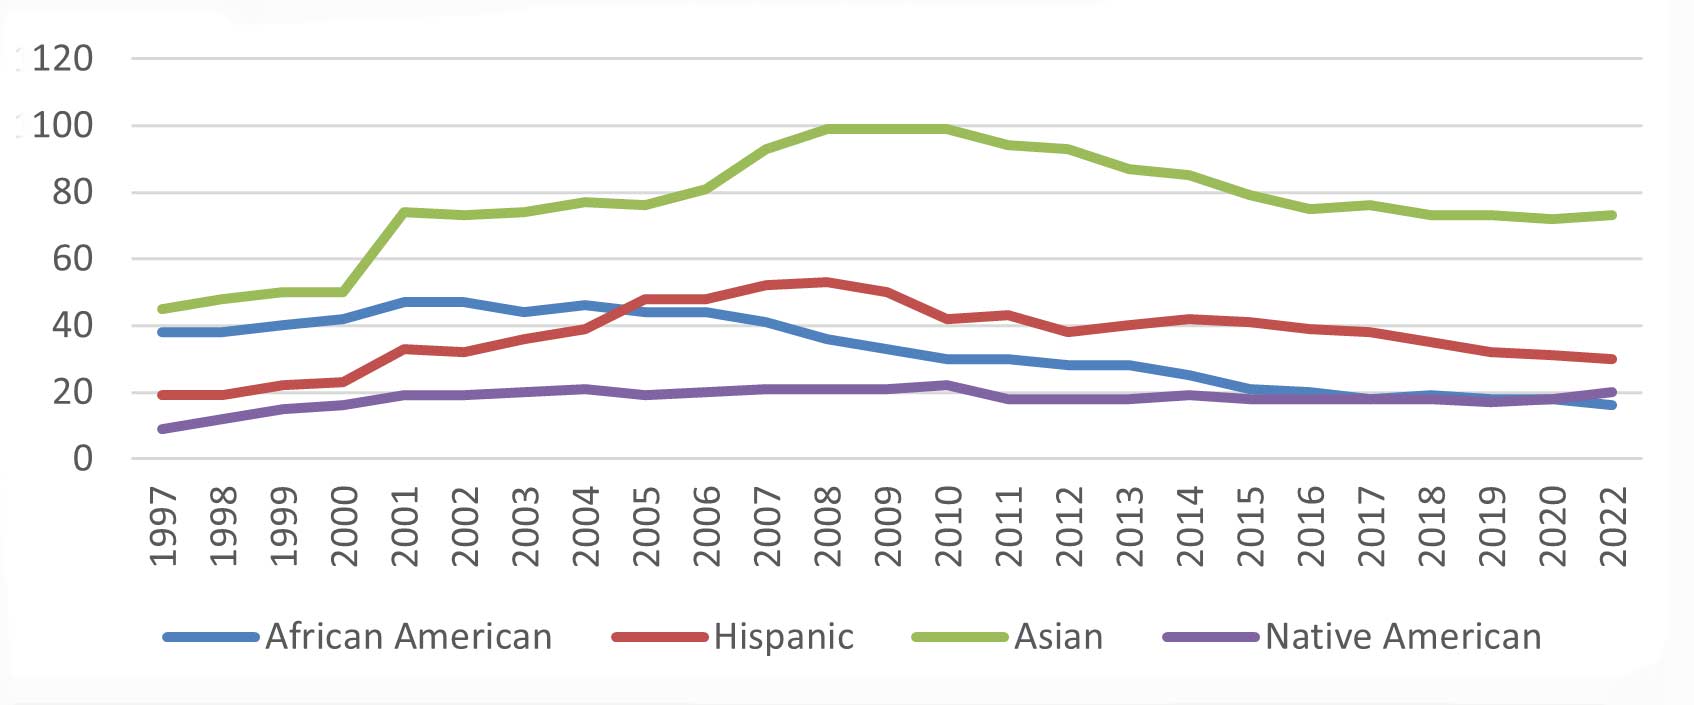 Figure 1 depicts total number of MDIs disaggregated by racial or ethnic ownership from 1997 through 2022